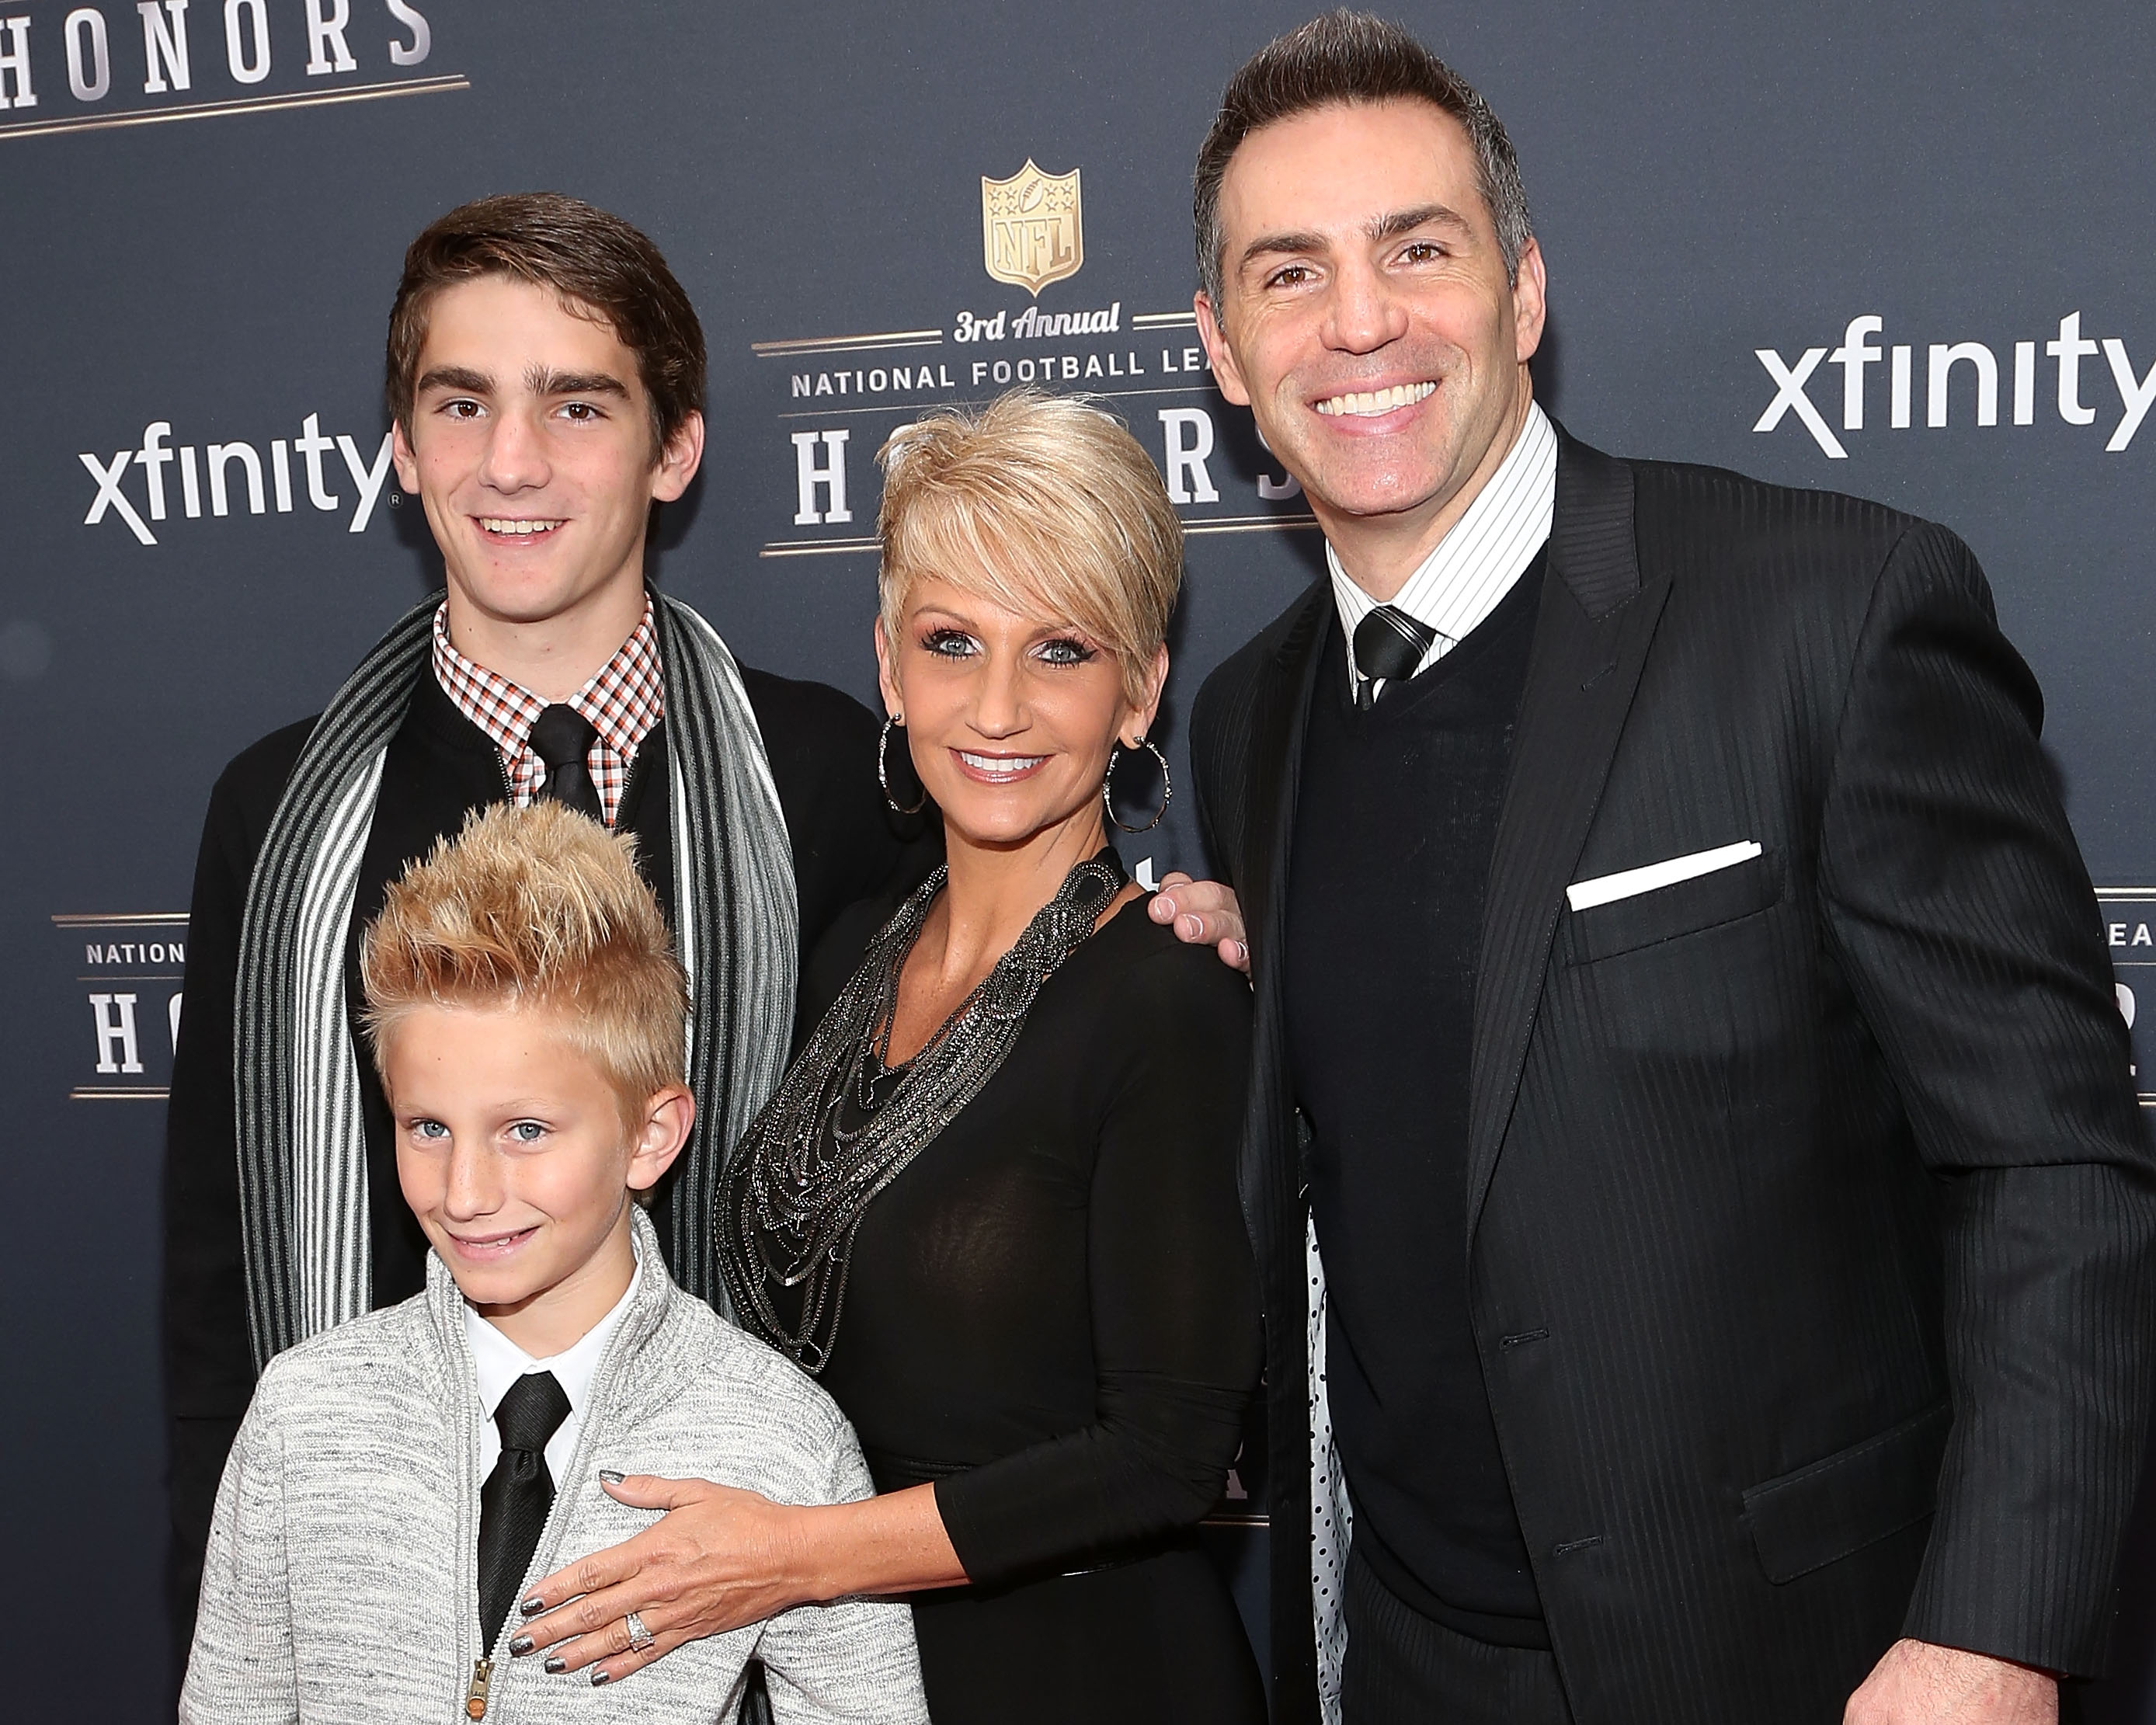 Kurt Warner won two NFL MVPs and s Super Bowl during his career, but he's staying busy in retirement raising a slew of kids.